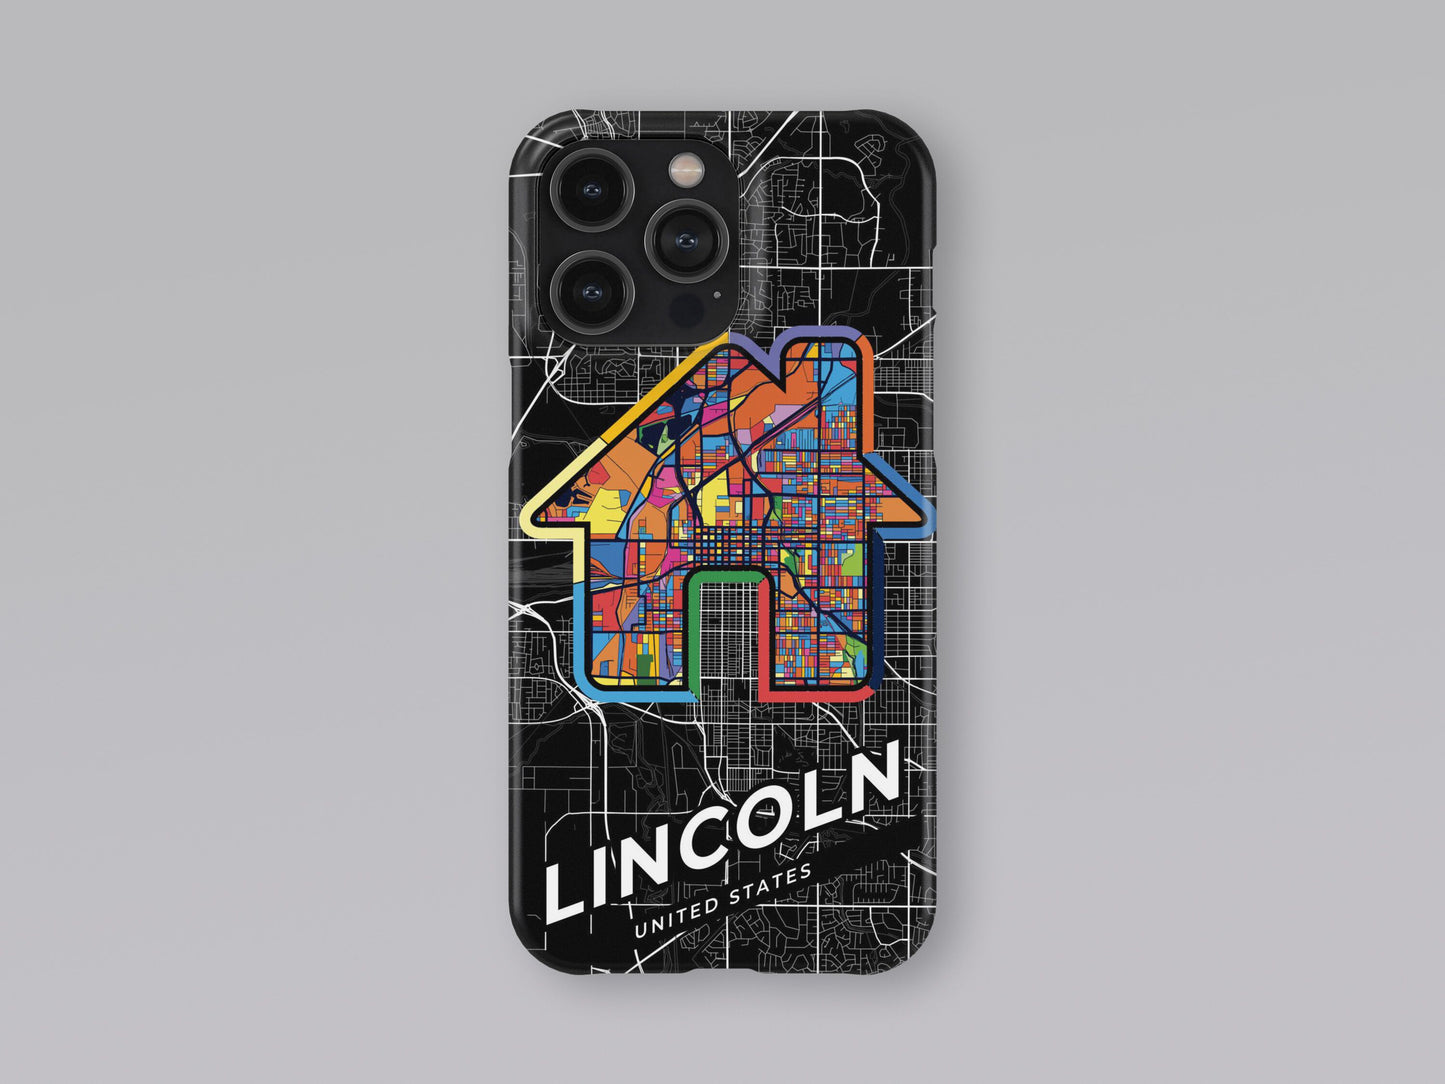 Lincoln Nebraska slim phone case with colorful icon. Birthday, wedding or housewarming gift. Couple match cases. 3